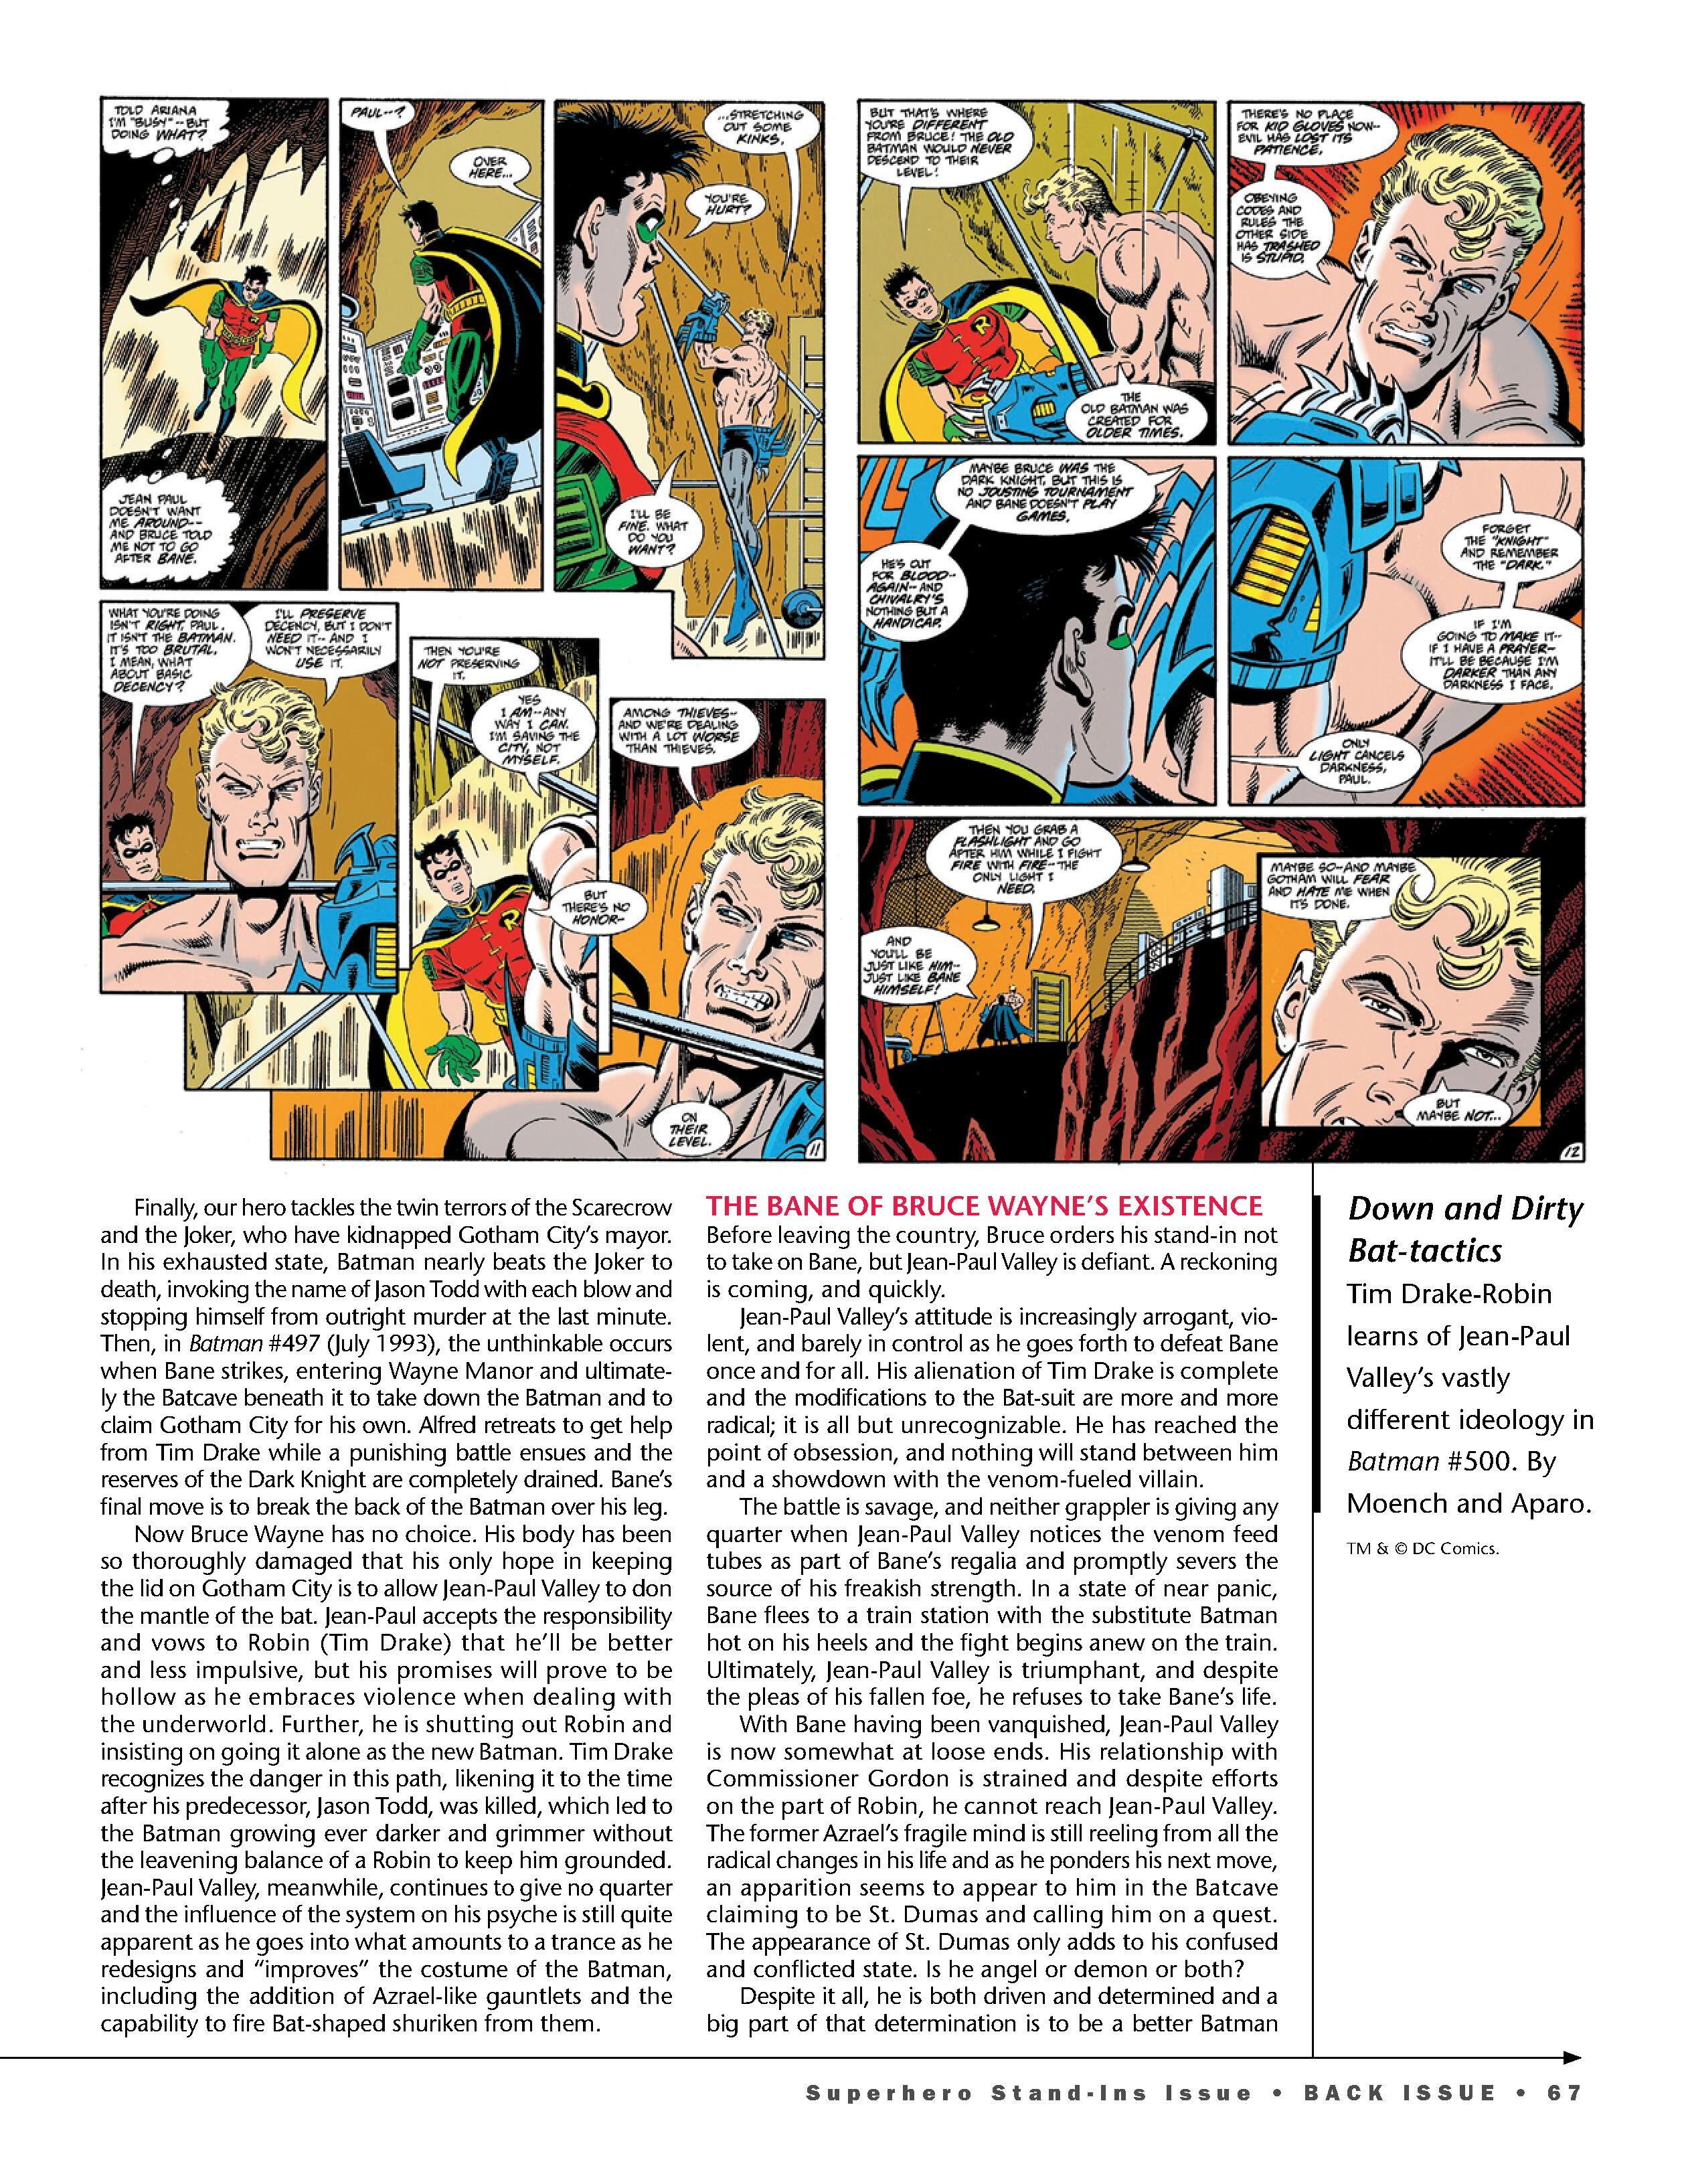 Read online Back Issue comic -  Issue #117 - 69